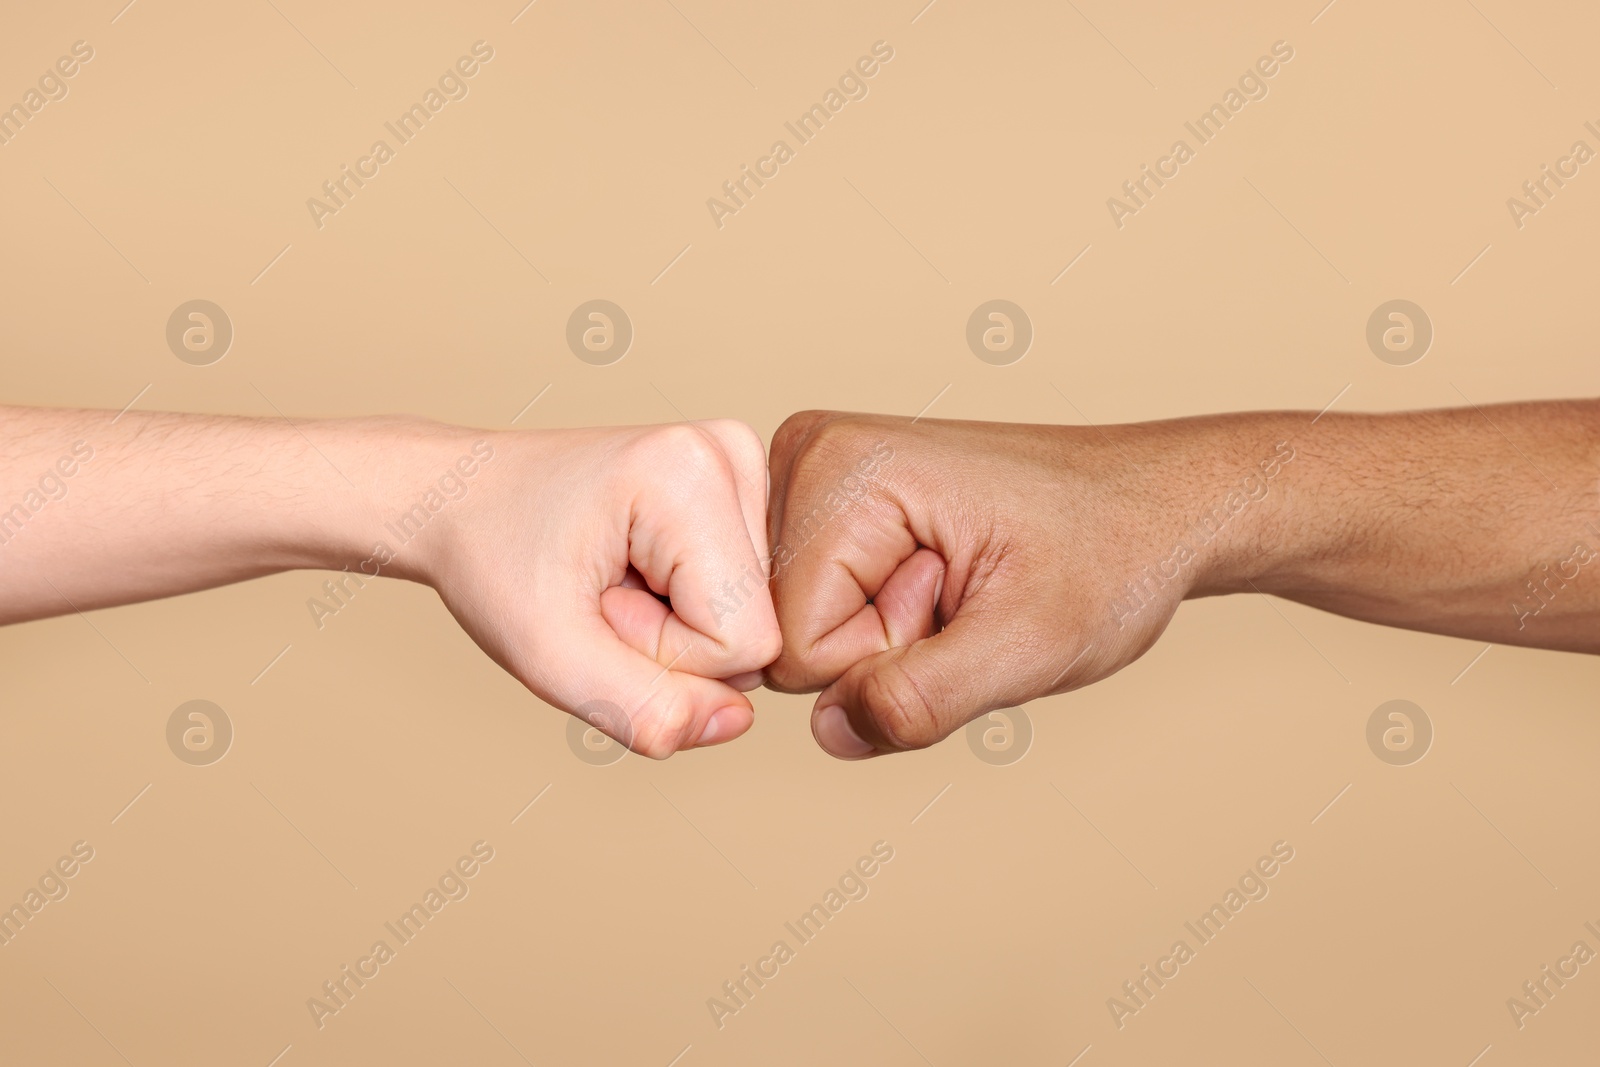 Photo of International relationships. People making fist bump on light brown background, closeup